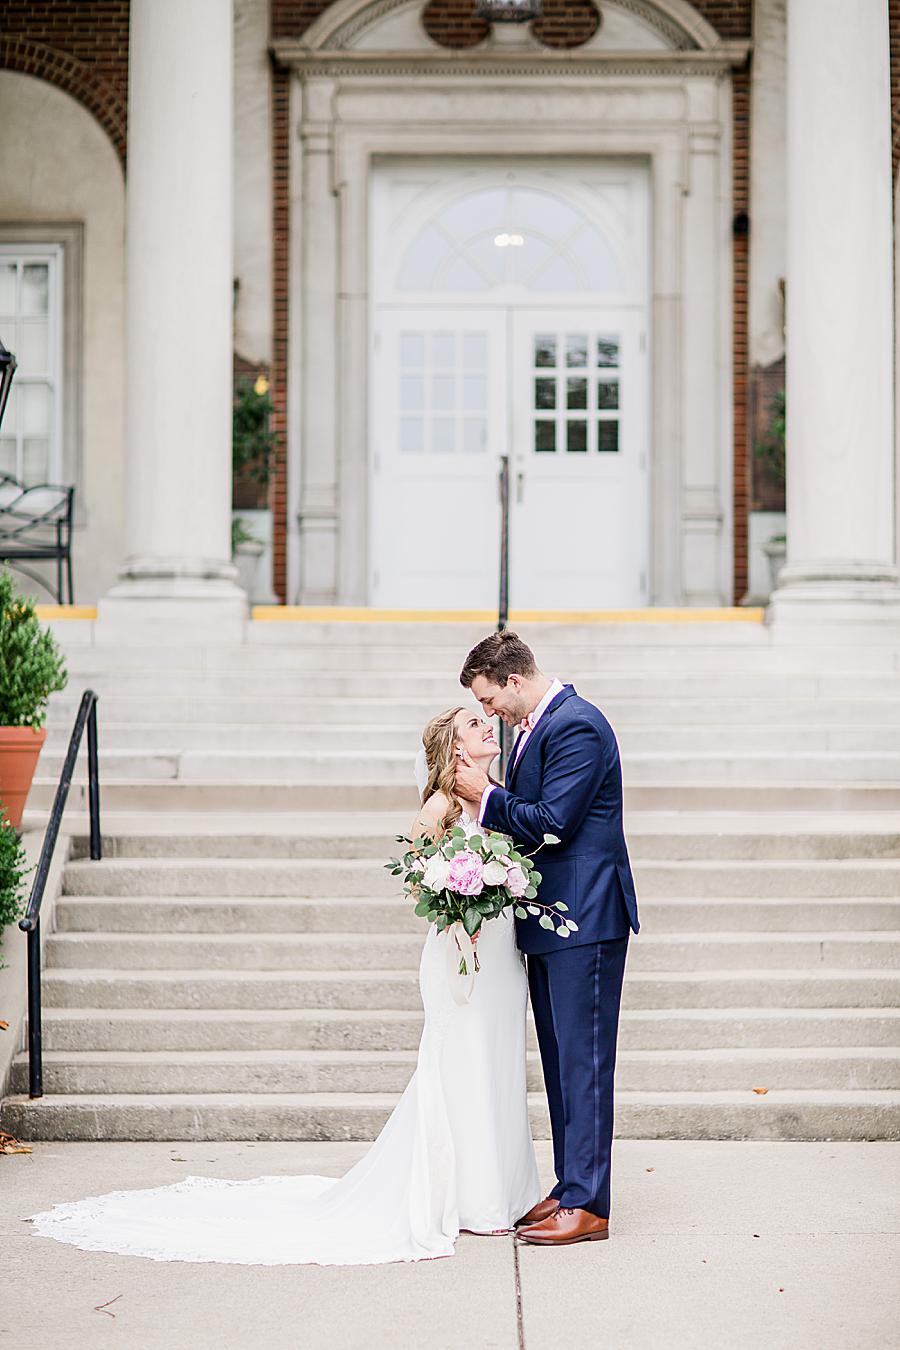 At the base of the church steps at this The Olmsted Wedding by Knoxville Wedding Photographer, Amanda May Photos.